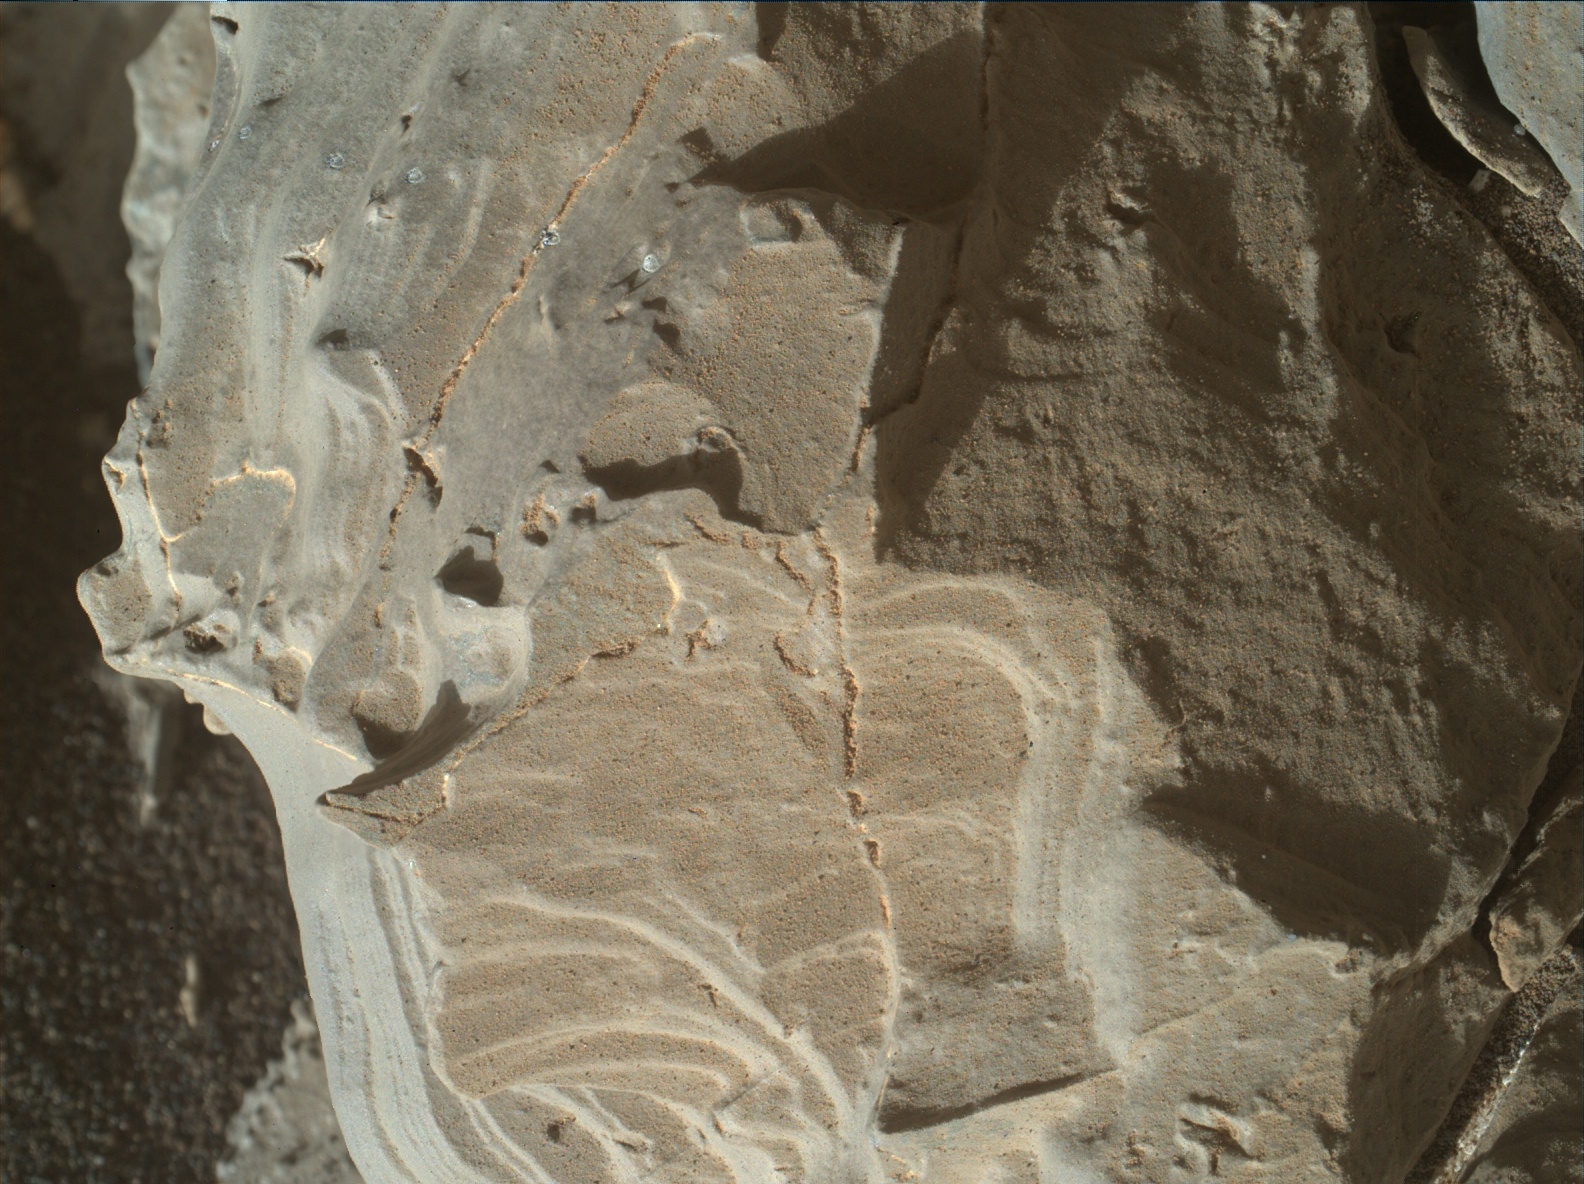 Nasa's Mars rover Curiosity acquired this image using its Mars Hand Lens Imager (MAHLI) on Sol 1939